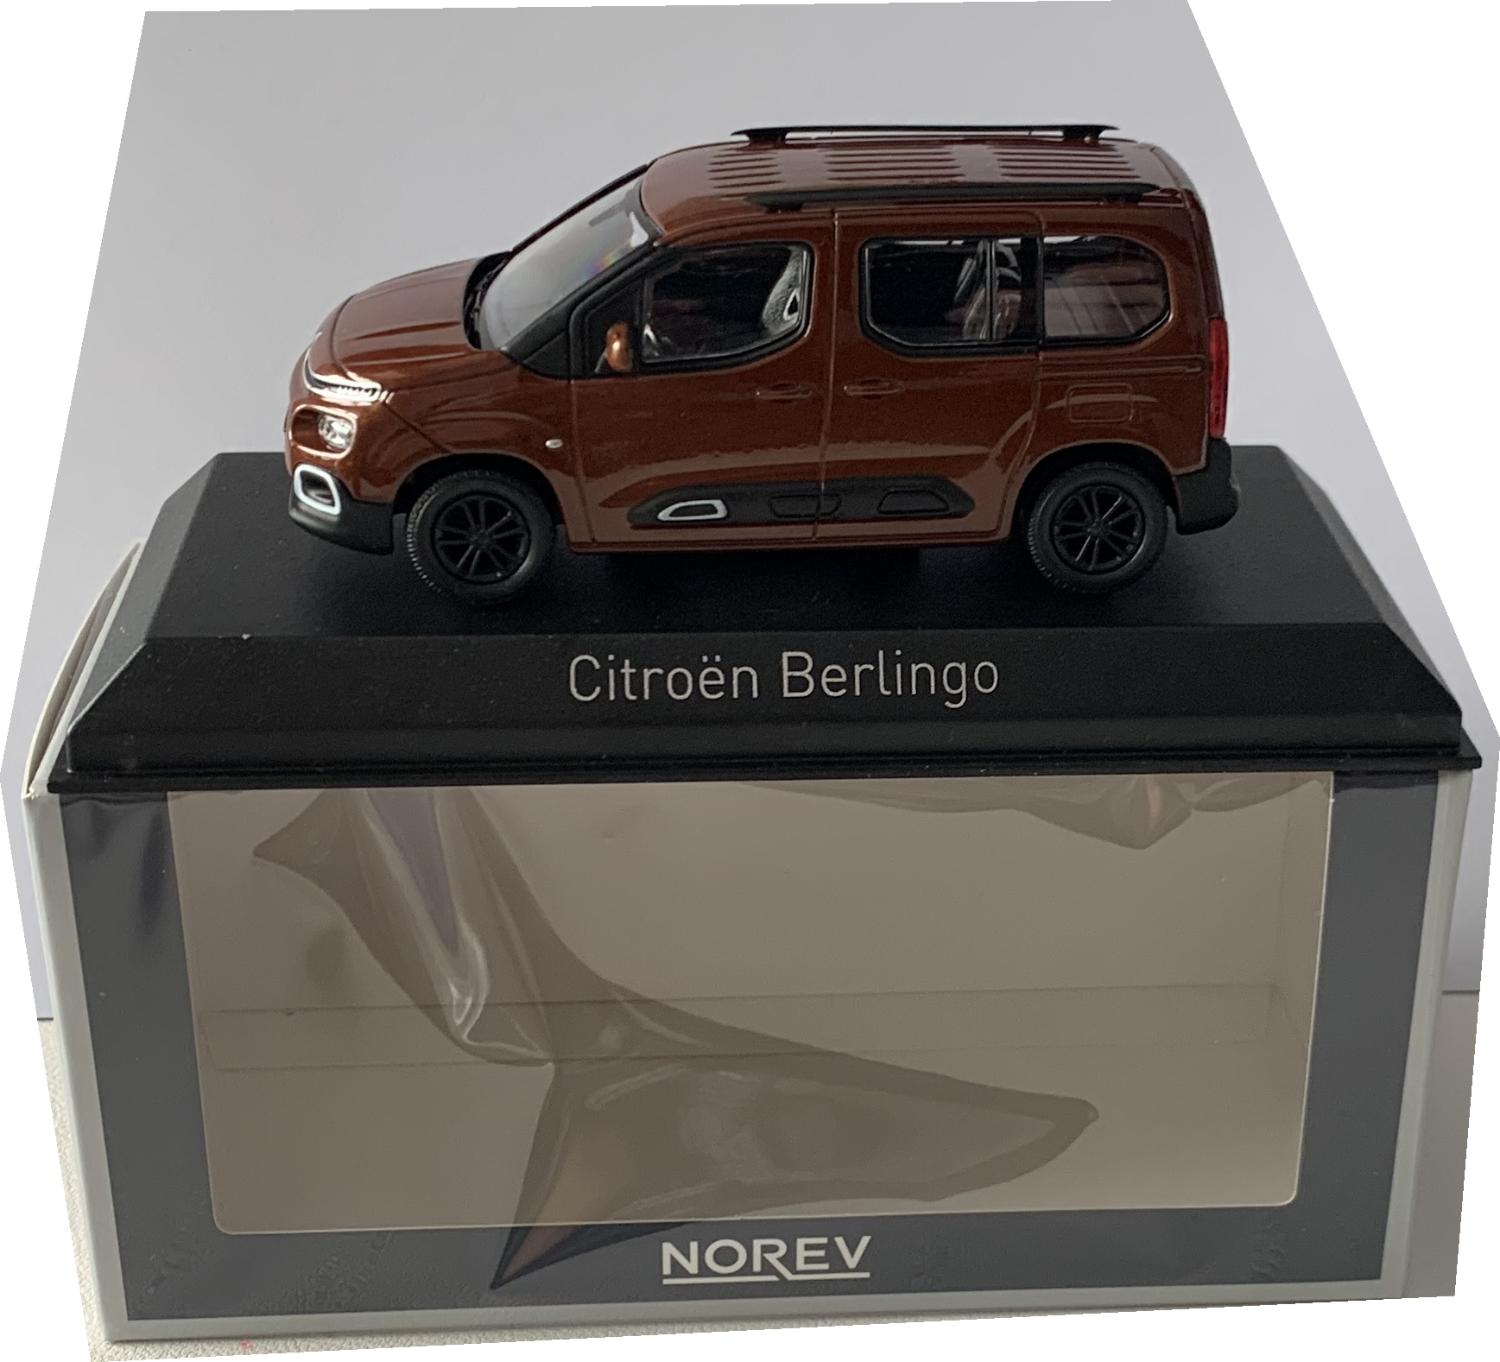 An excellent reproduction of the Citroen Berlingo with detail throughout, all authentically recreated.  Model is mounted on a removable plinth with a removable hard plastic cover